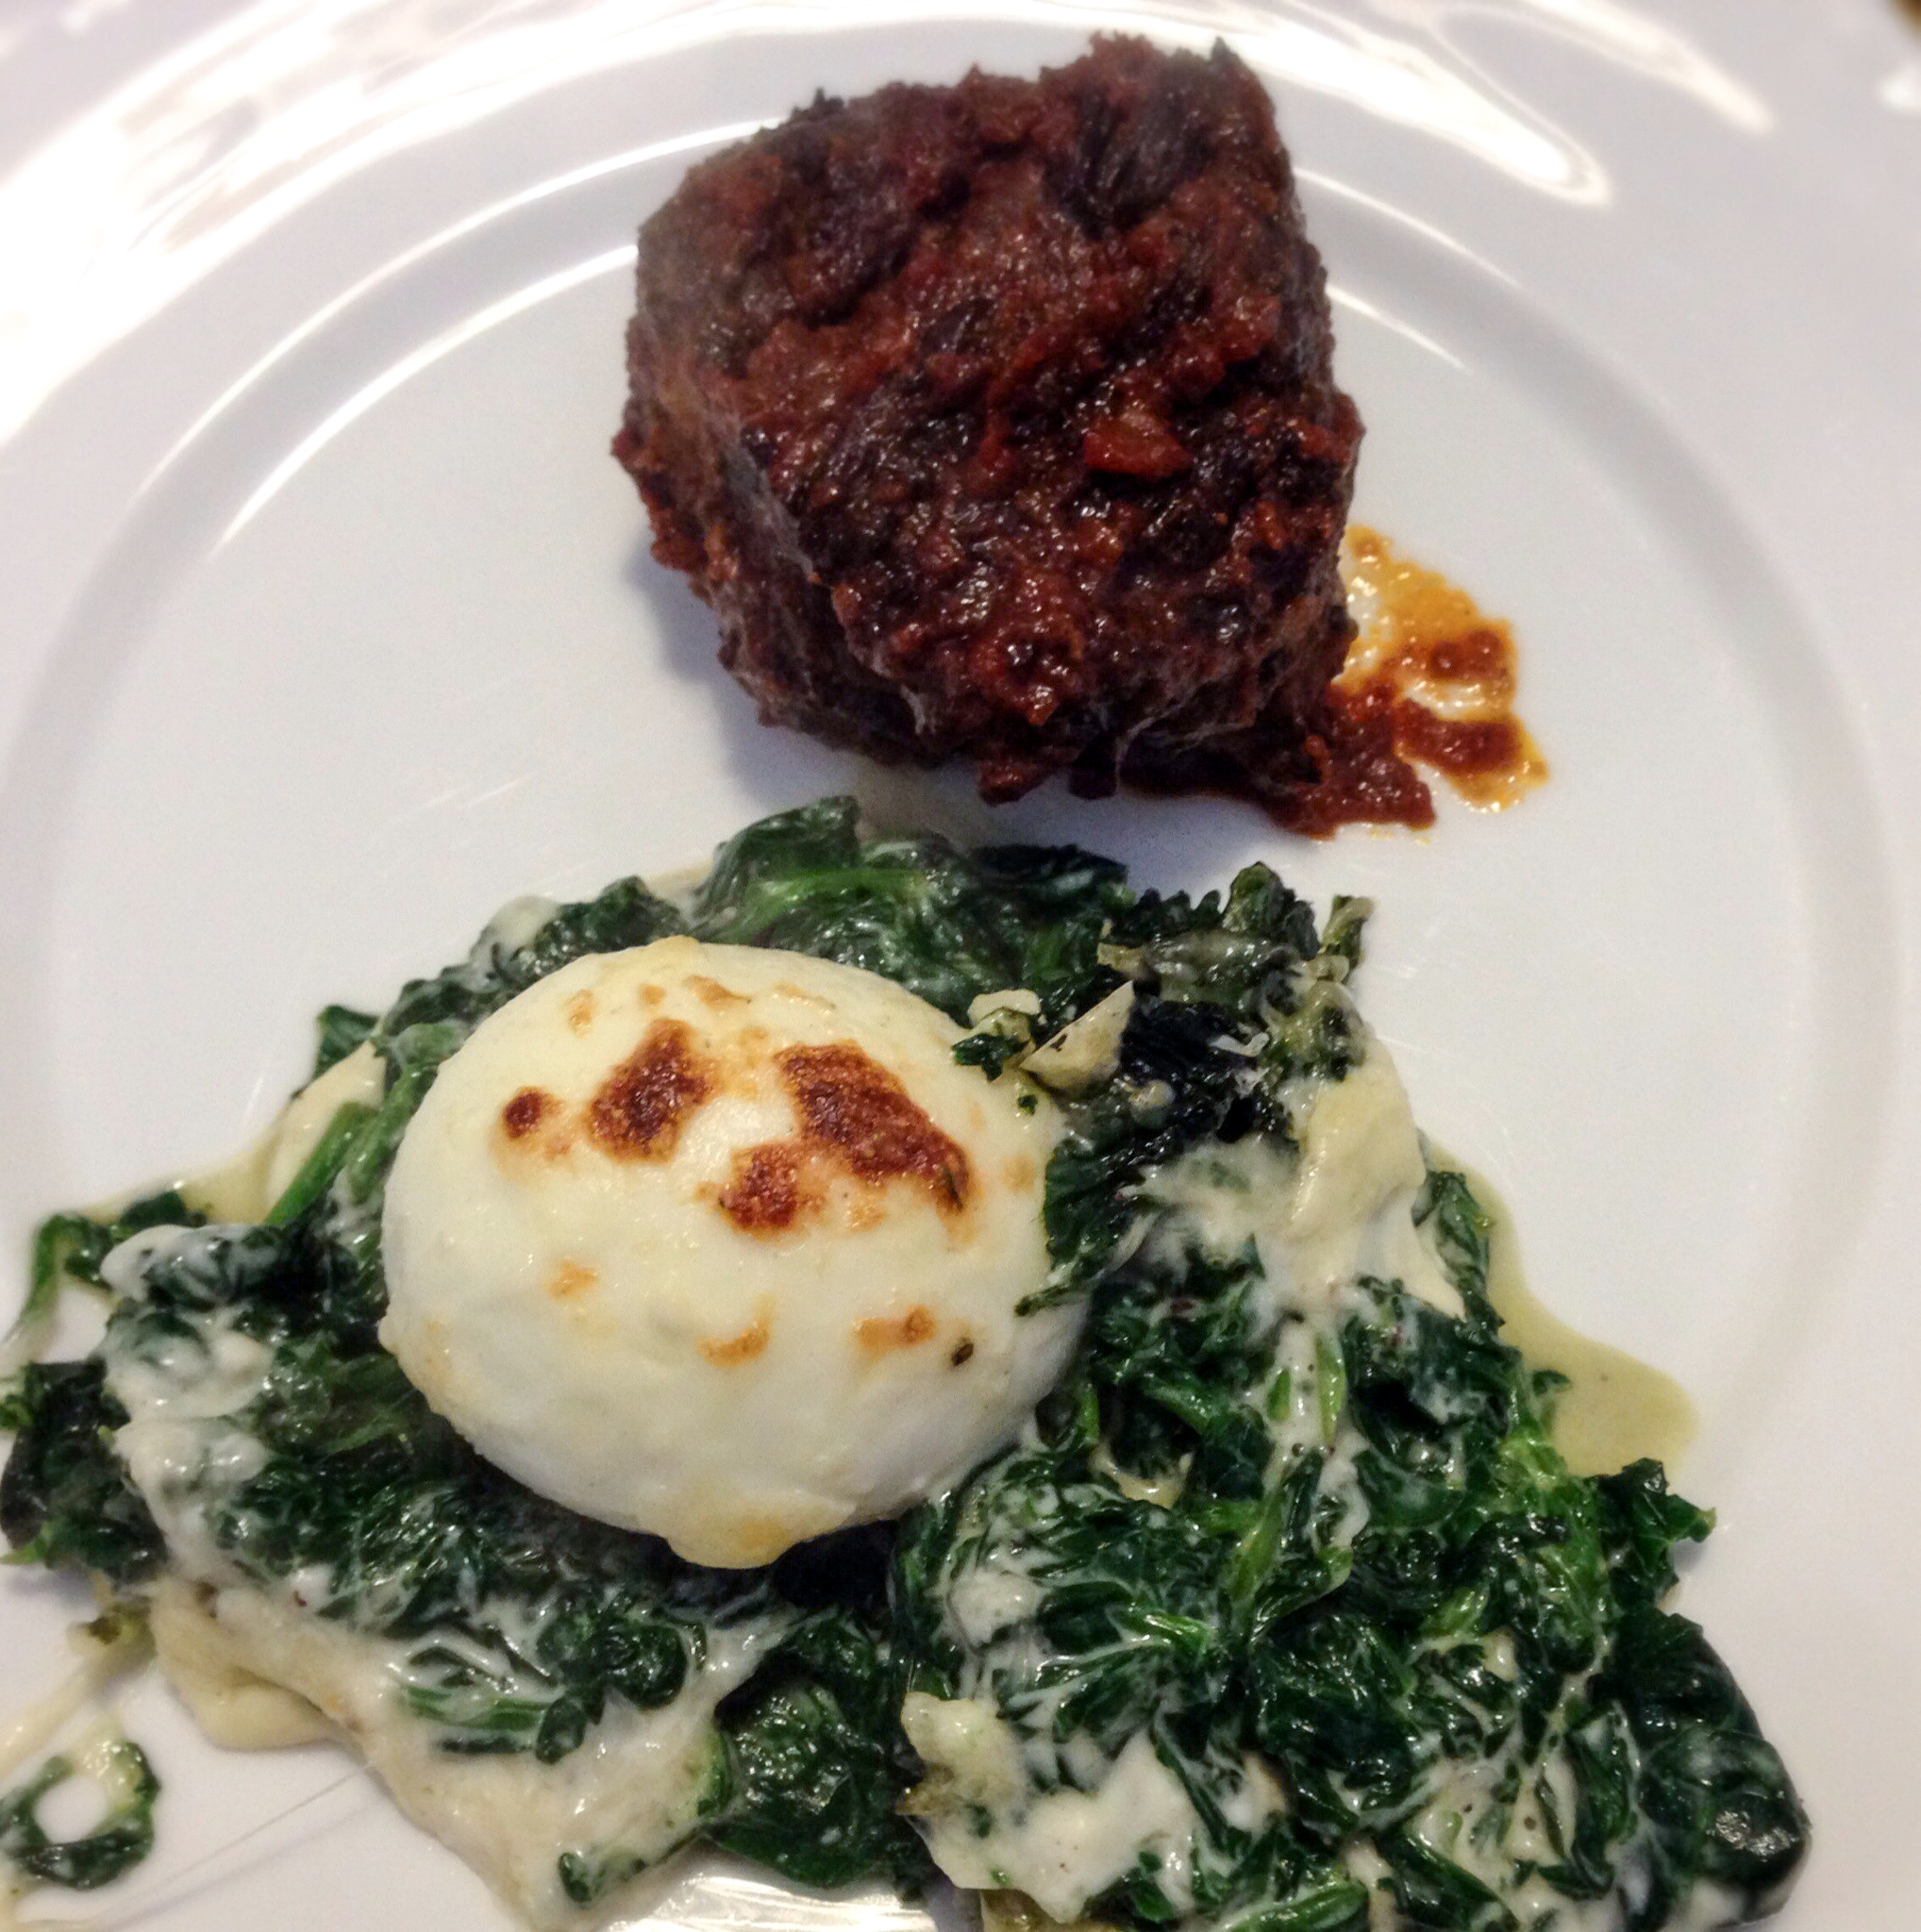 Eggs Mollet Florentine with Braised Beef Short Ribs